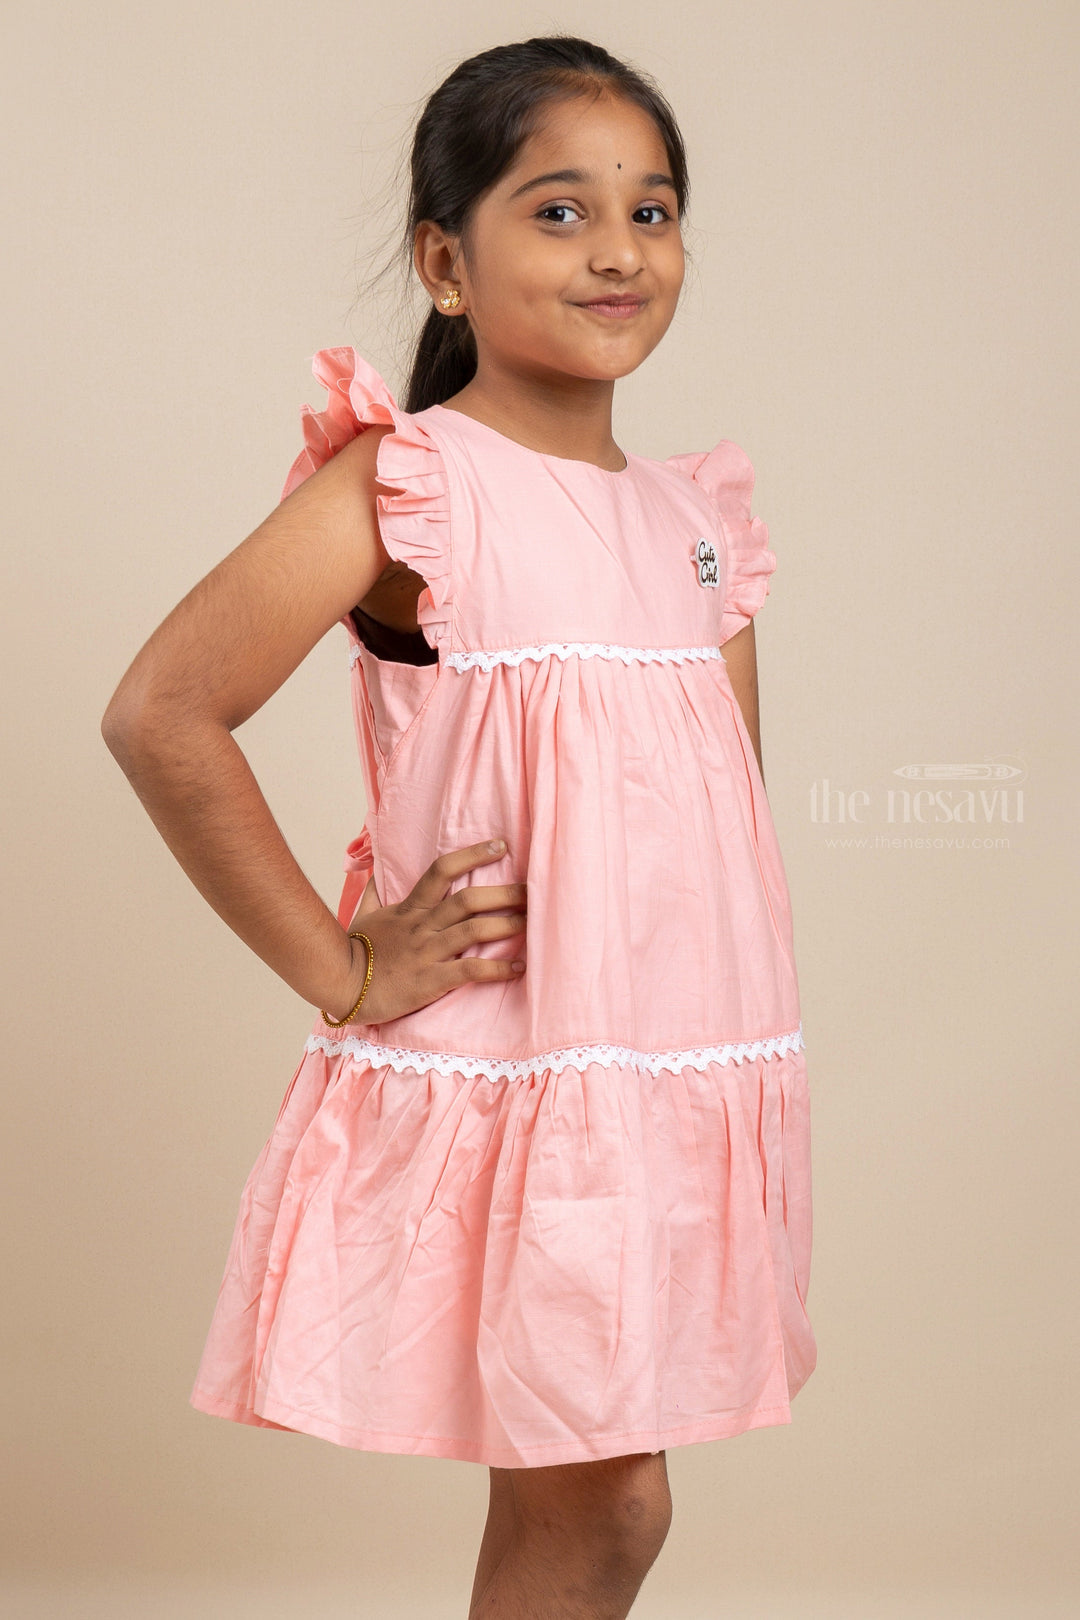 The Nesavu Girls Cotton Frock Blossom Pink - Cottony Cute Frocks With Lace Designs For Little Girls Nesavu Pink Frock Dress| Fashion Frock For Girls| The Nesavu